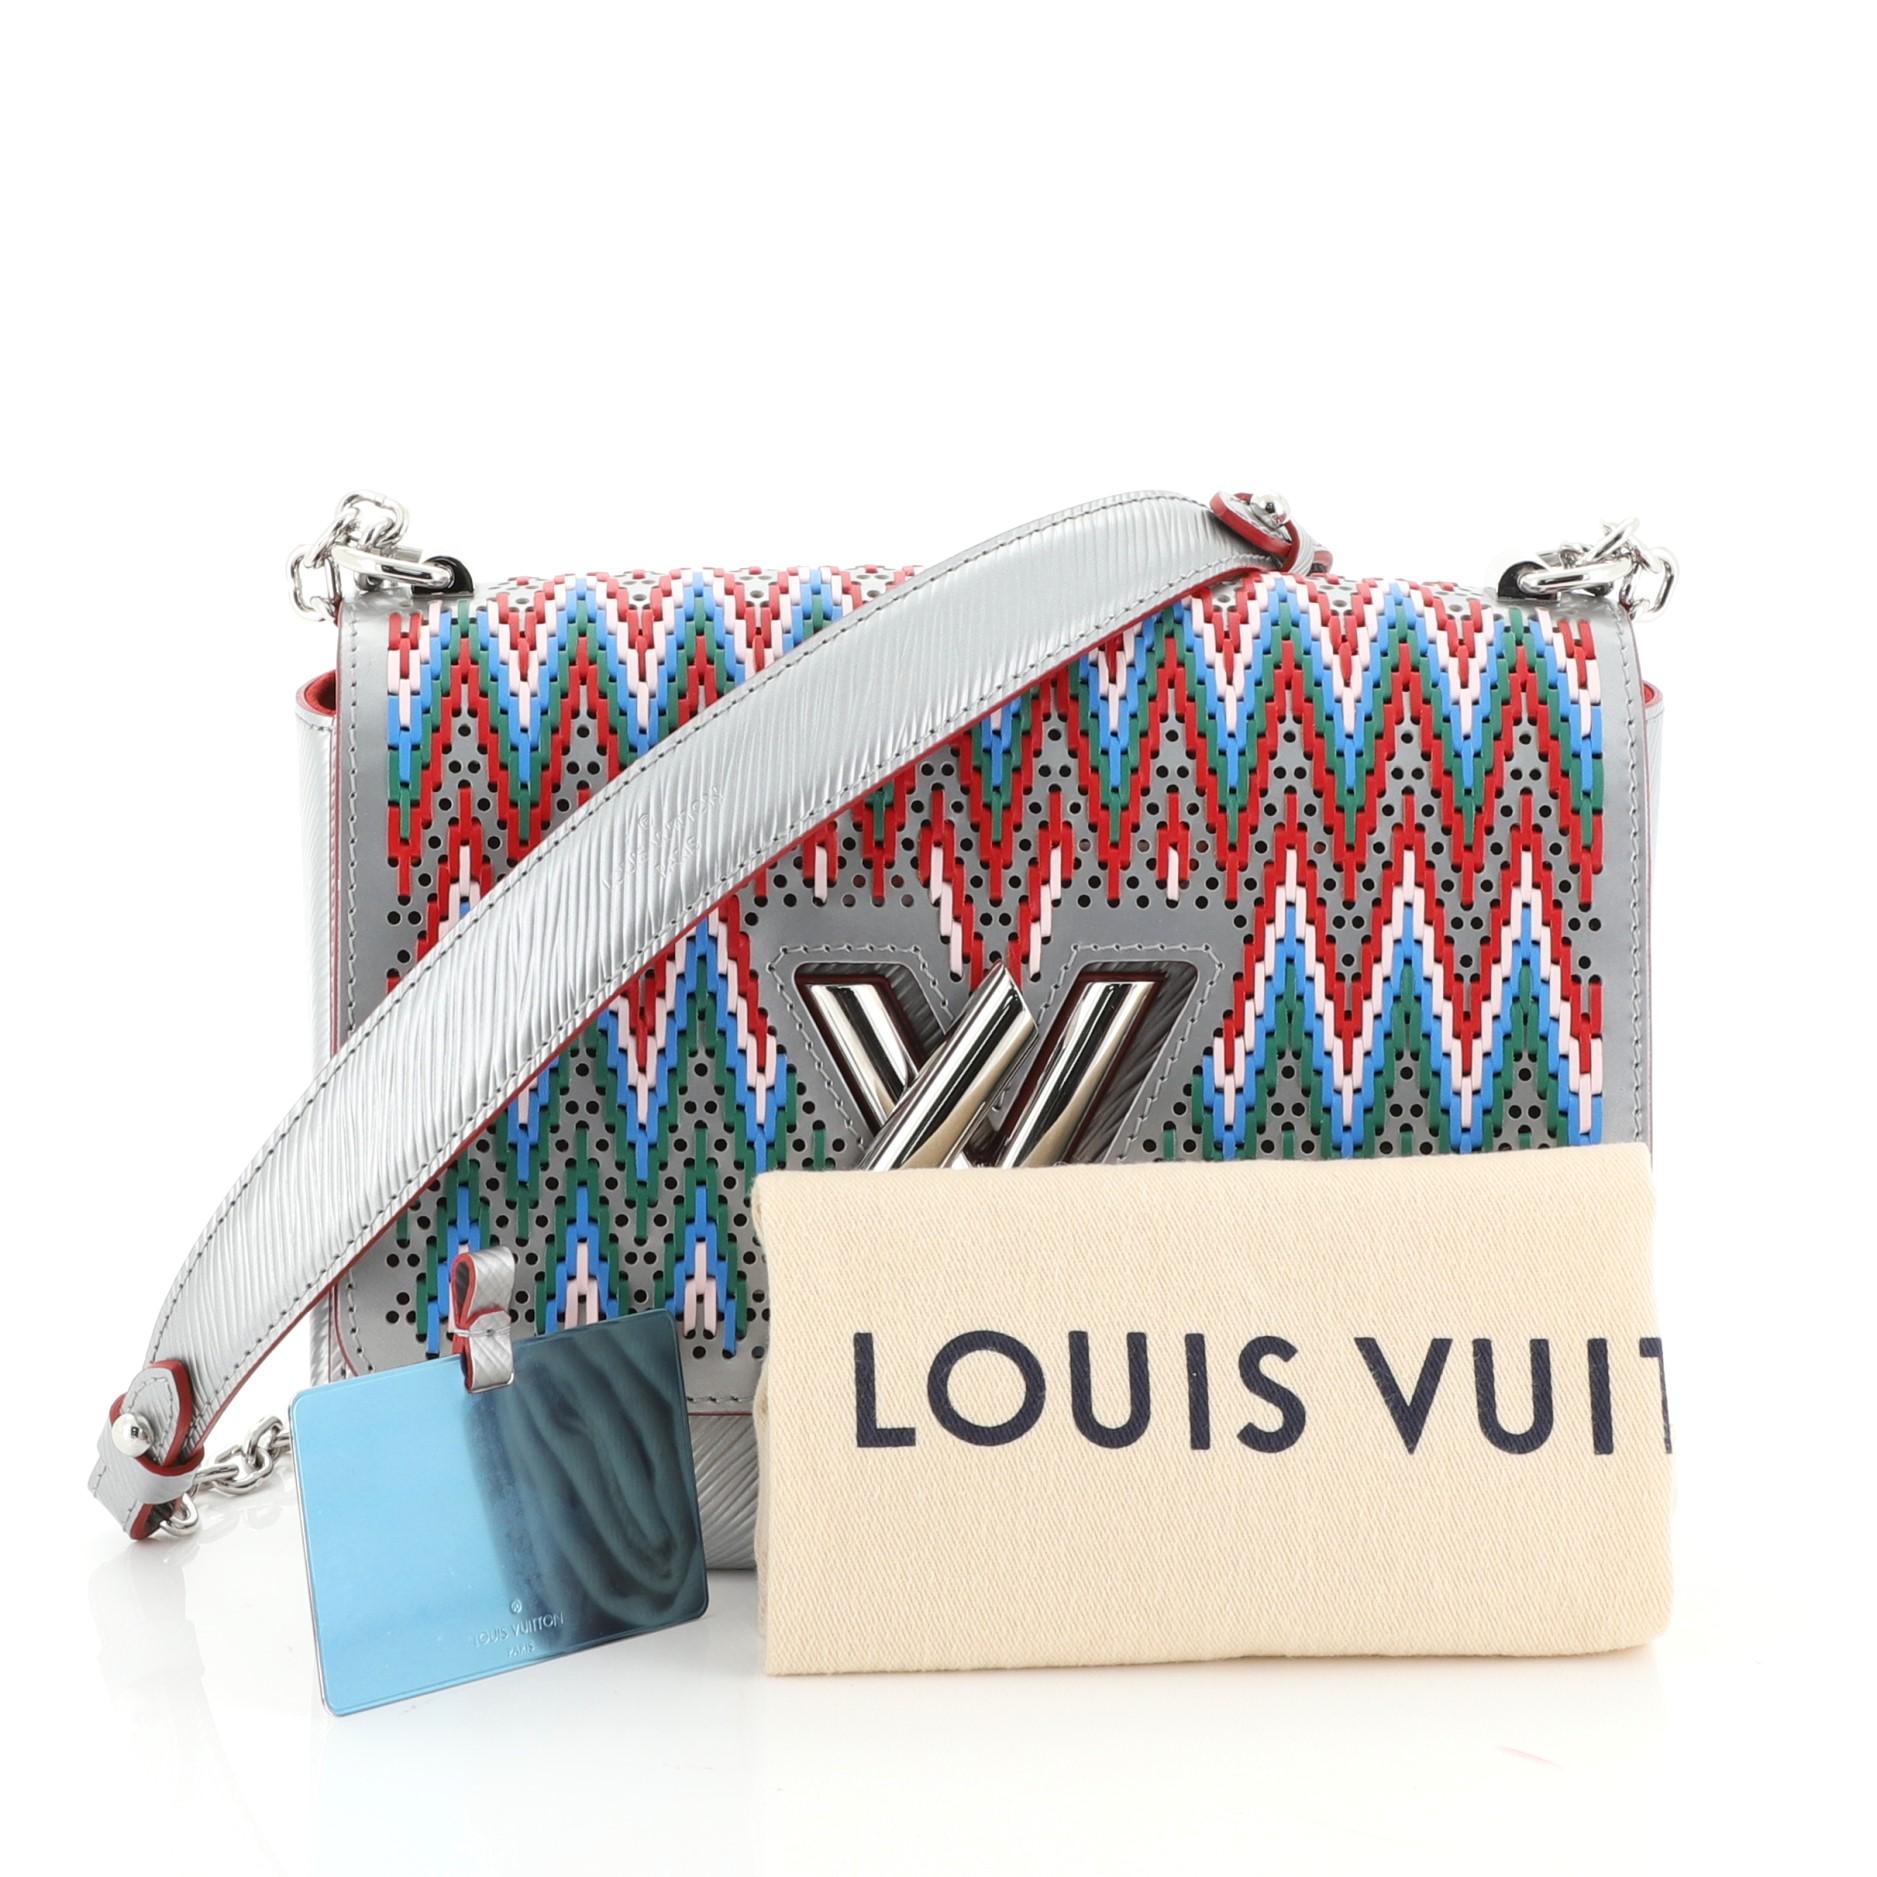 This Louis Vuitton Twist Handbag Limited Edition Stitched Epi Leather MM, crafted from silver stitched epi leather, features chain link strap with leather pad, frontal flap and silver-tone hardware. Its LV twist lock closure opens to a red